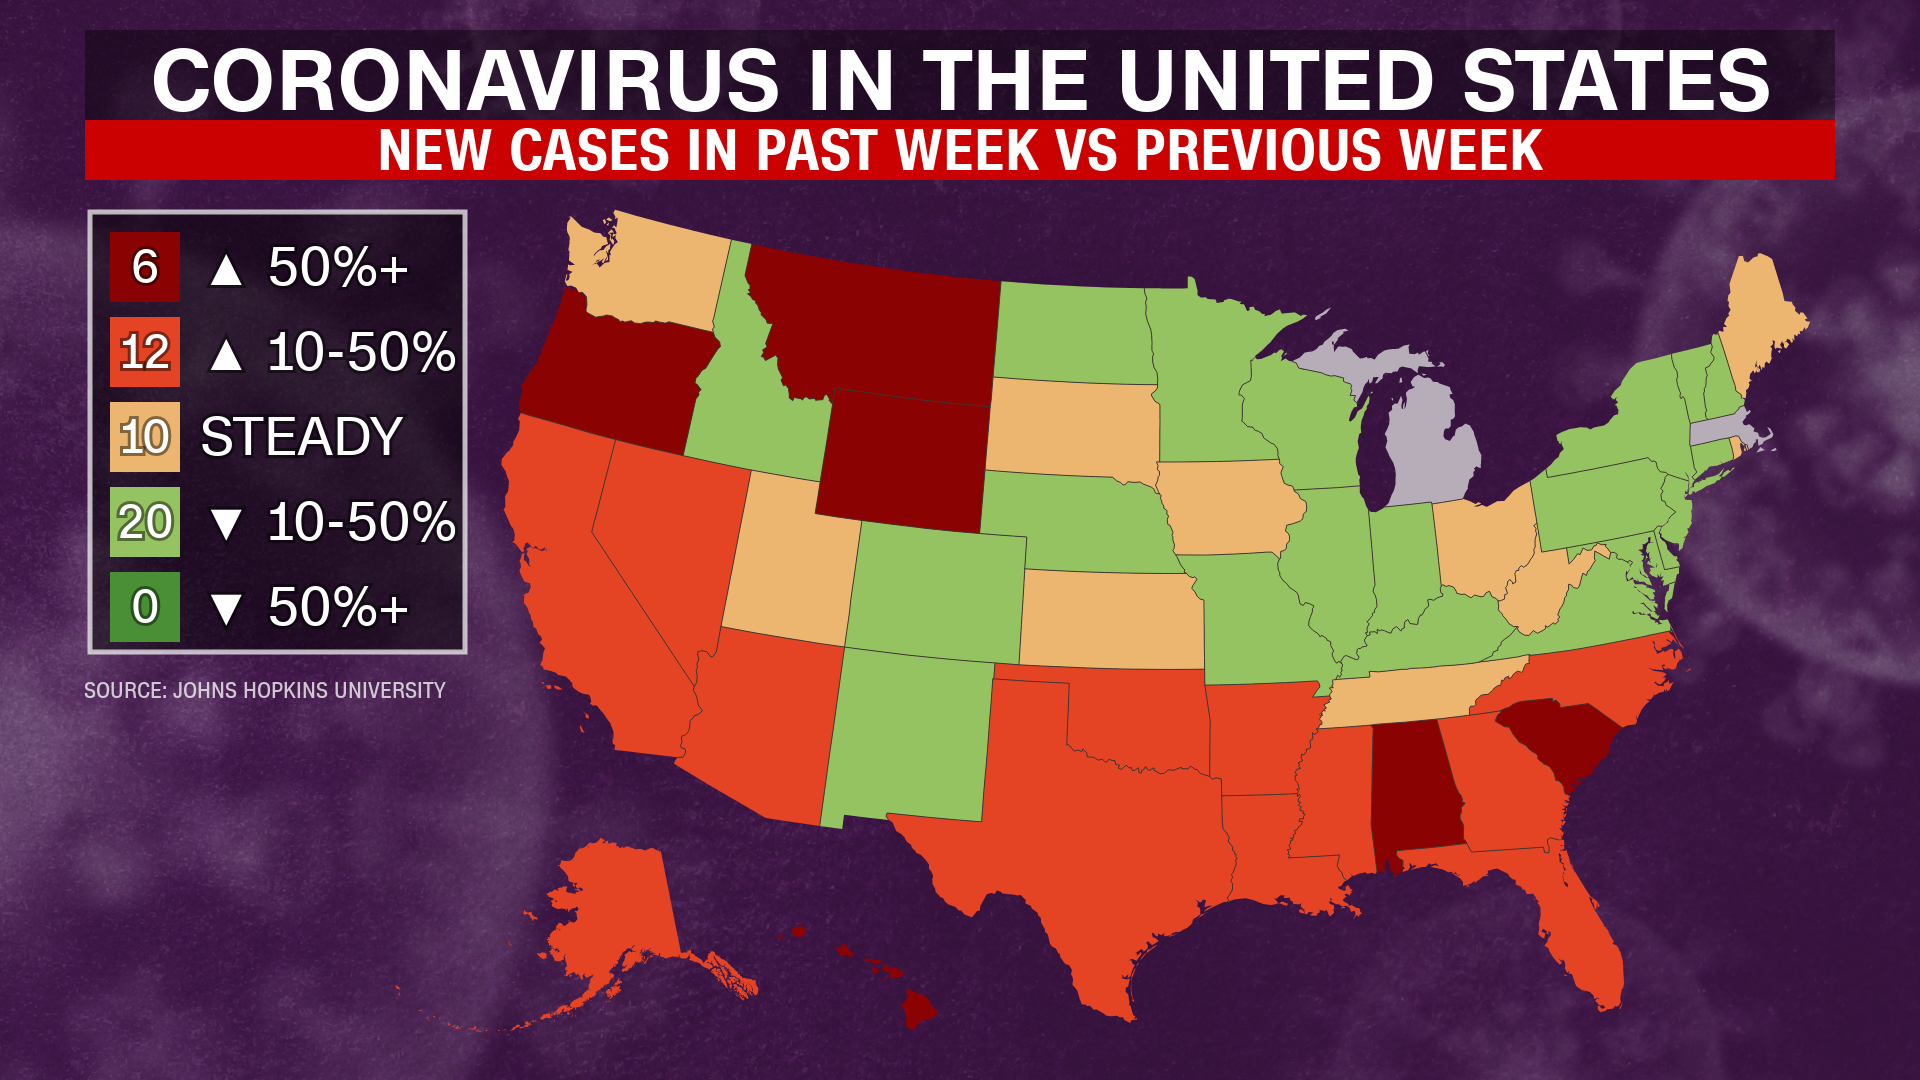 Coronavirus cases are increasing in 18 US states when the model estimates more deaths